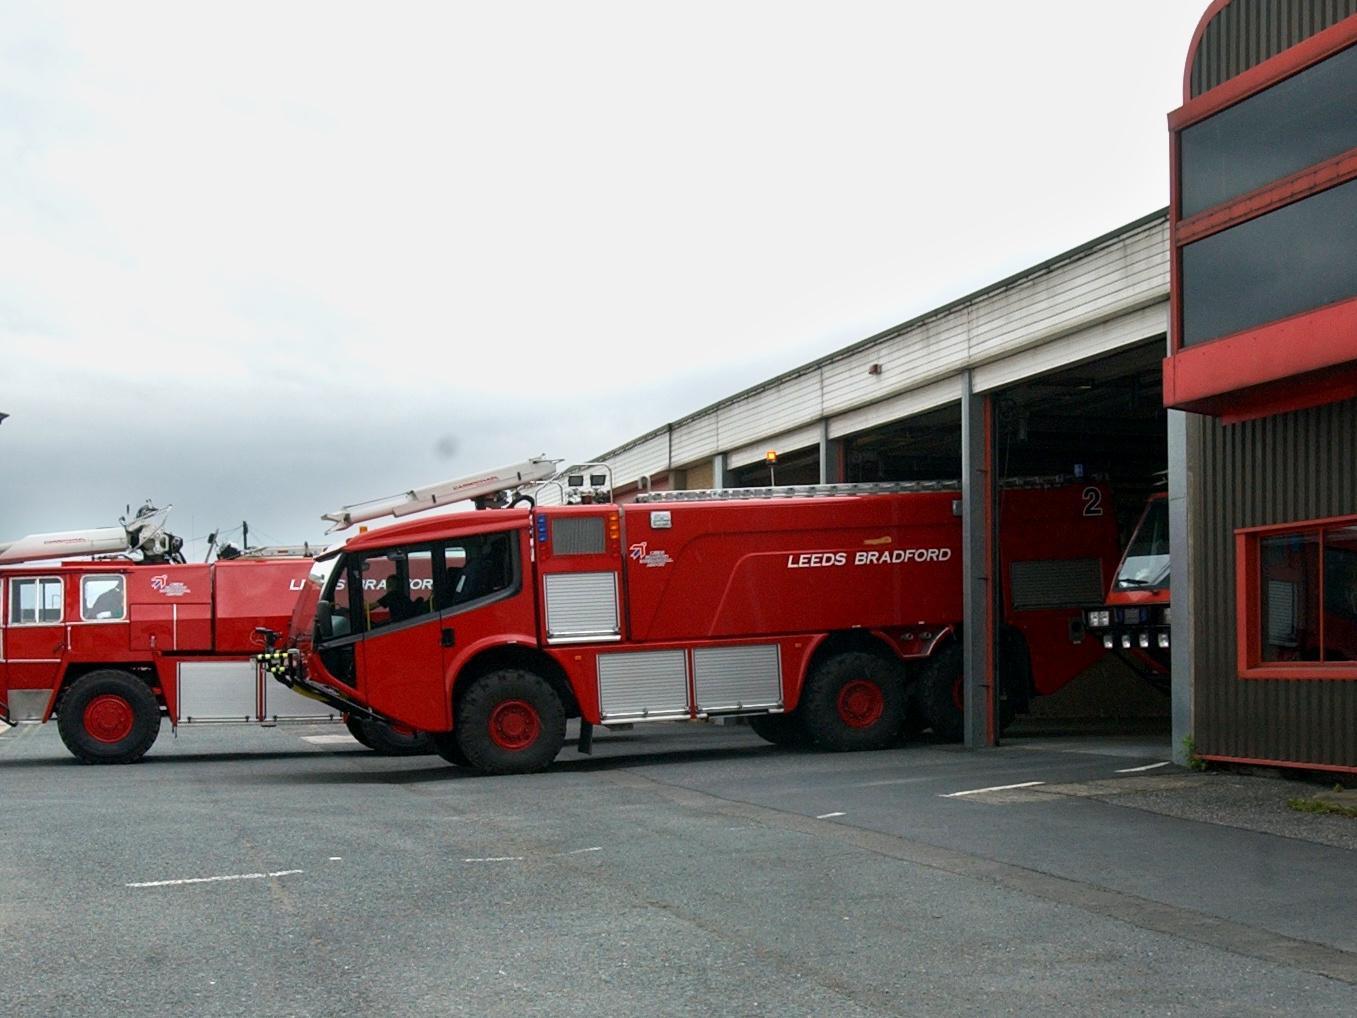 The fire station at Leeds Bradford Airport.